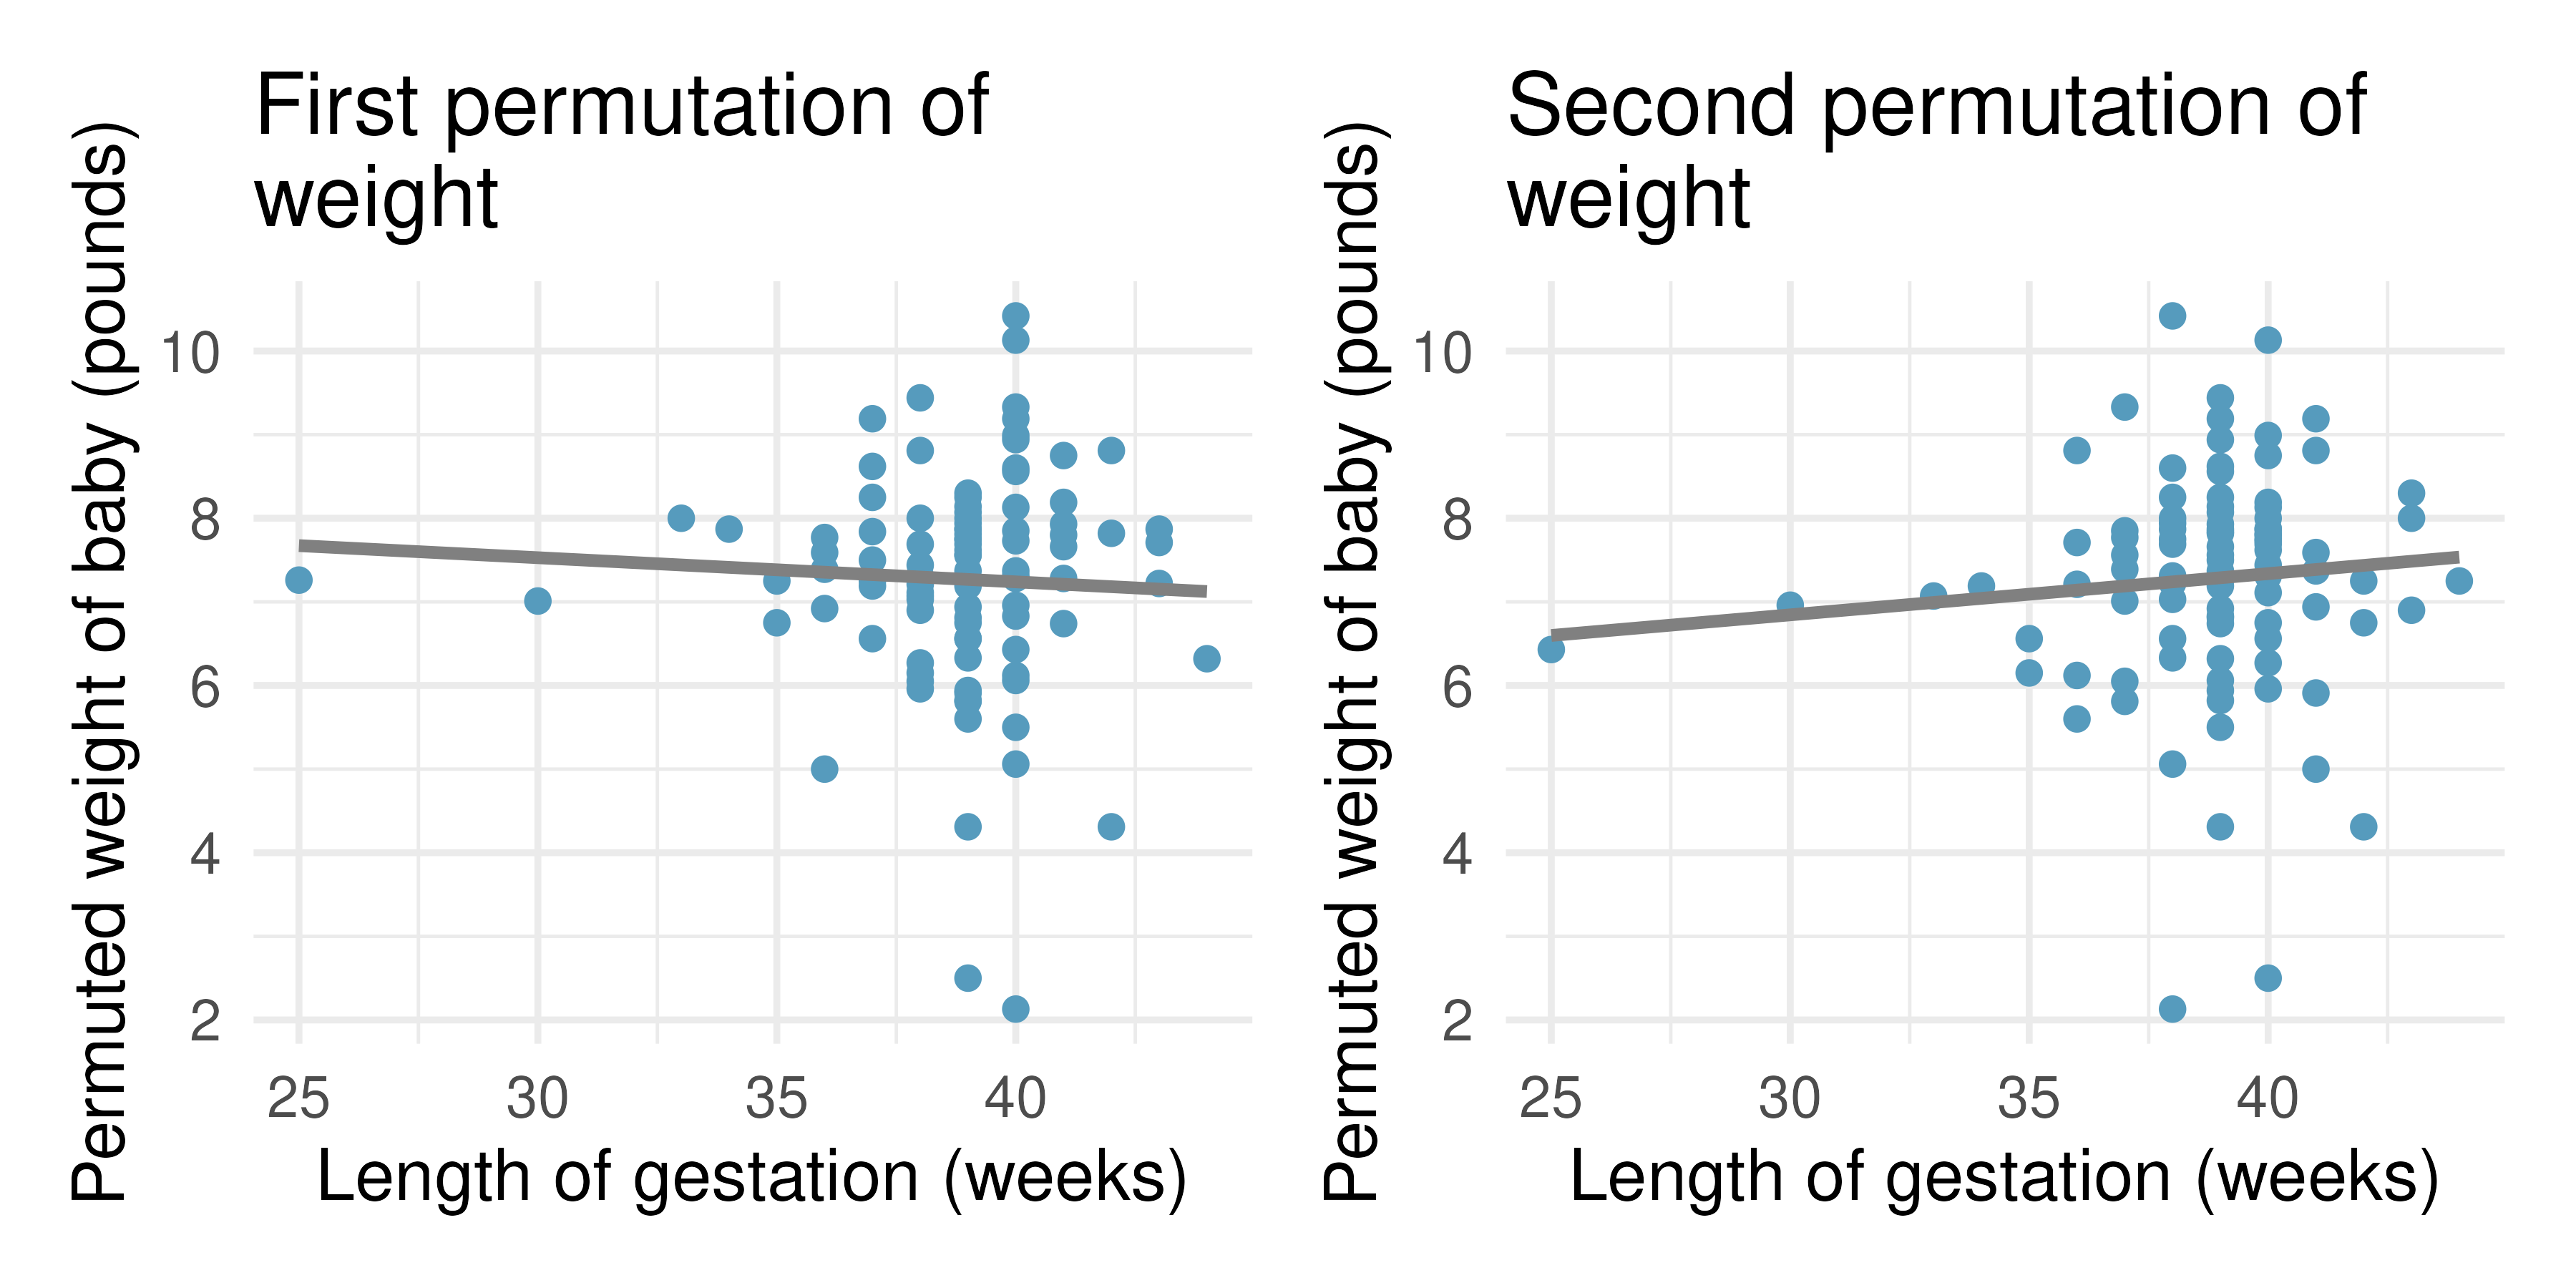 Two different permutations of the weight variable with slightly different least squares regression lines.